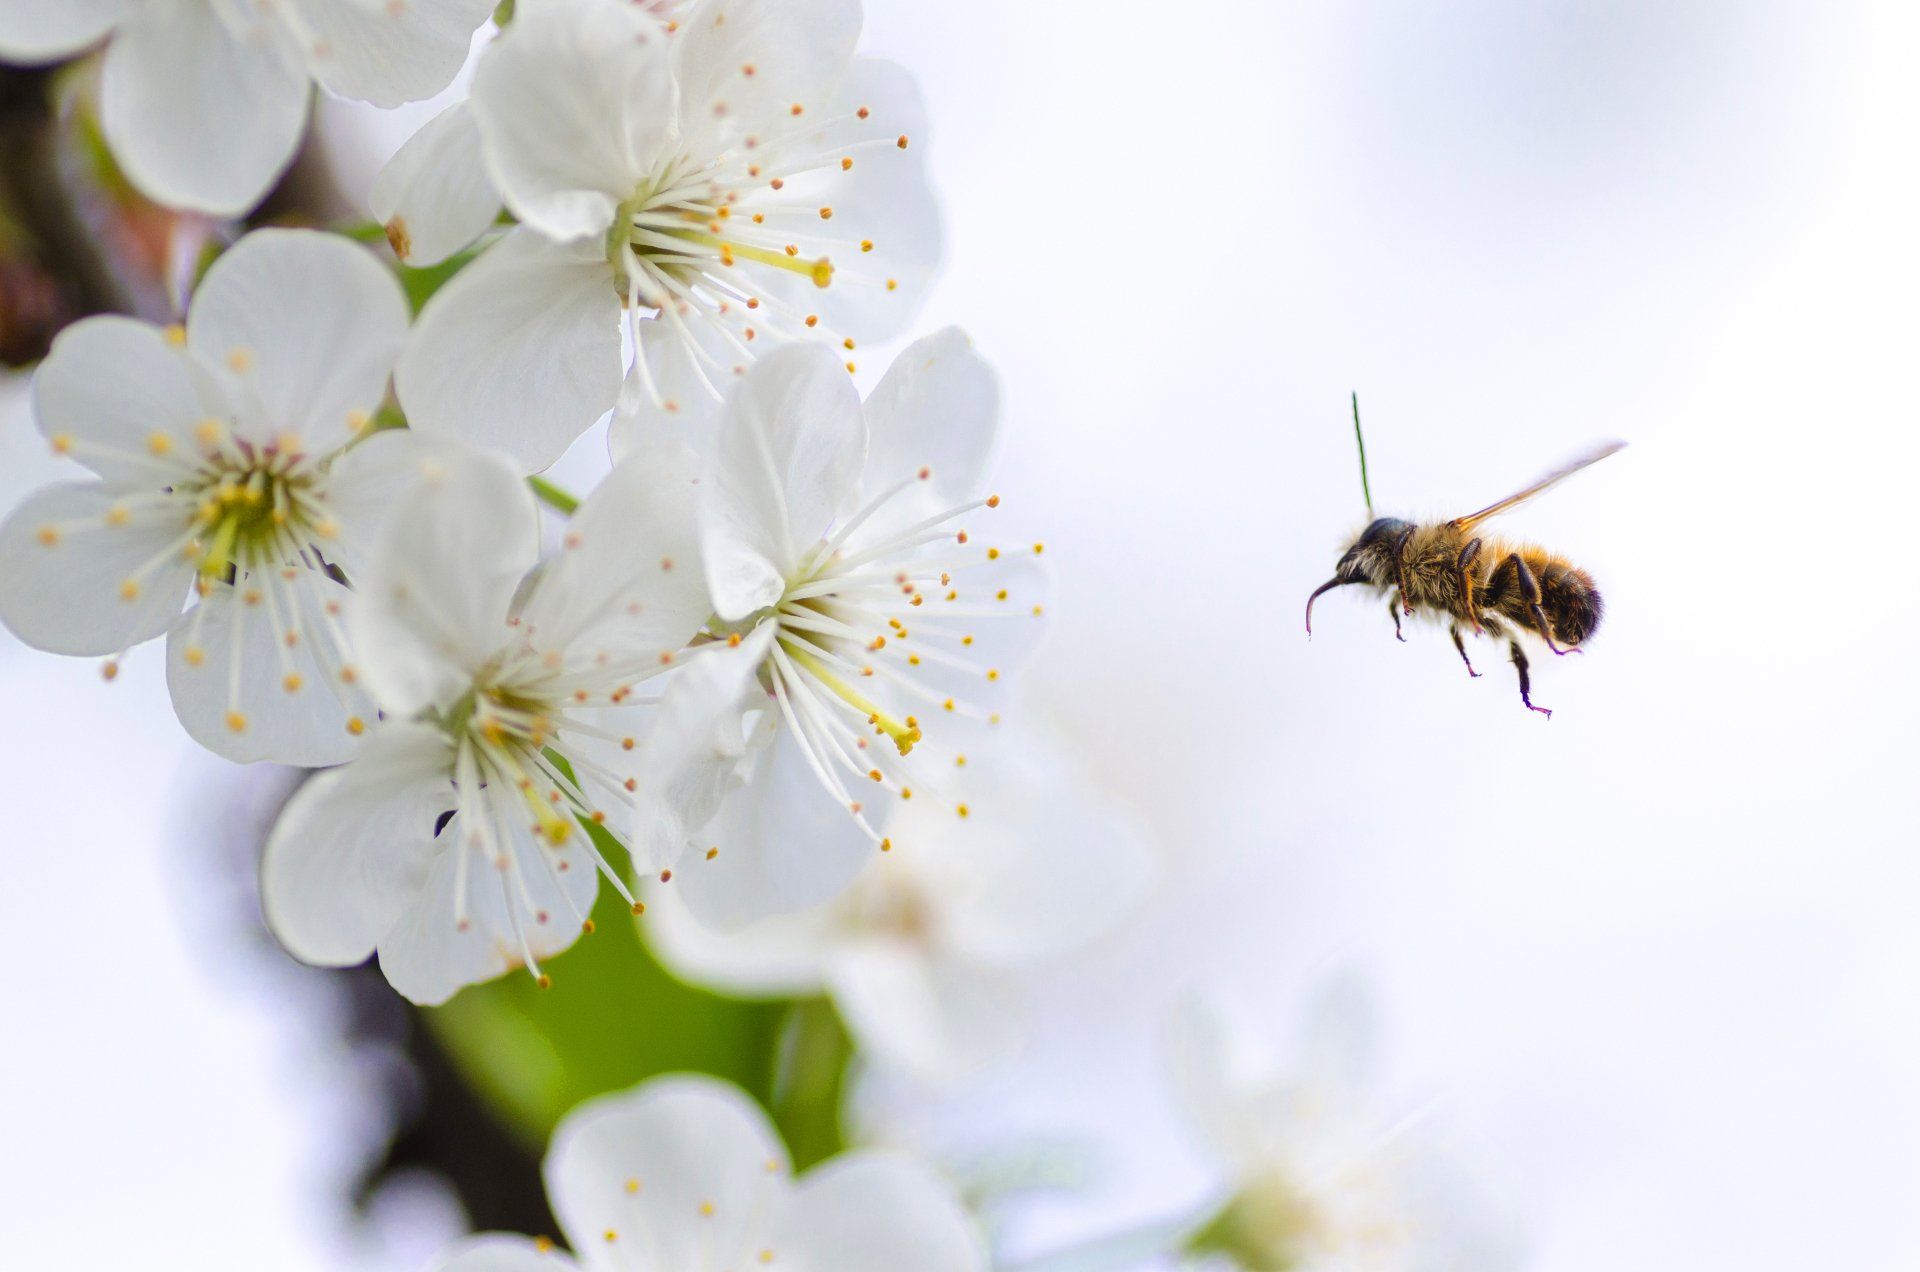 bee-based products for skincare and beauty